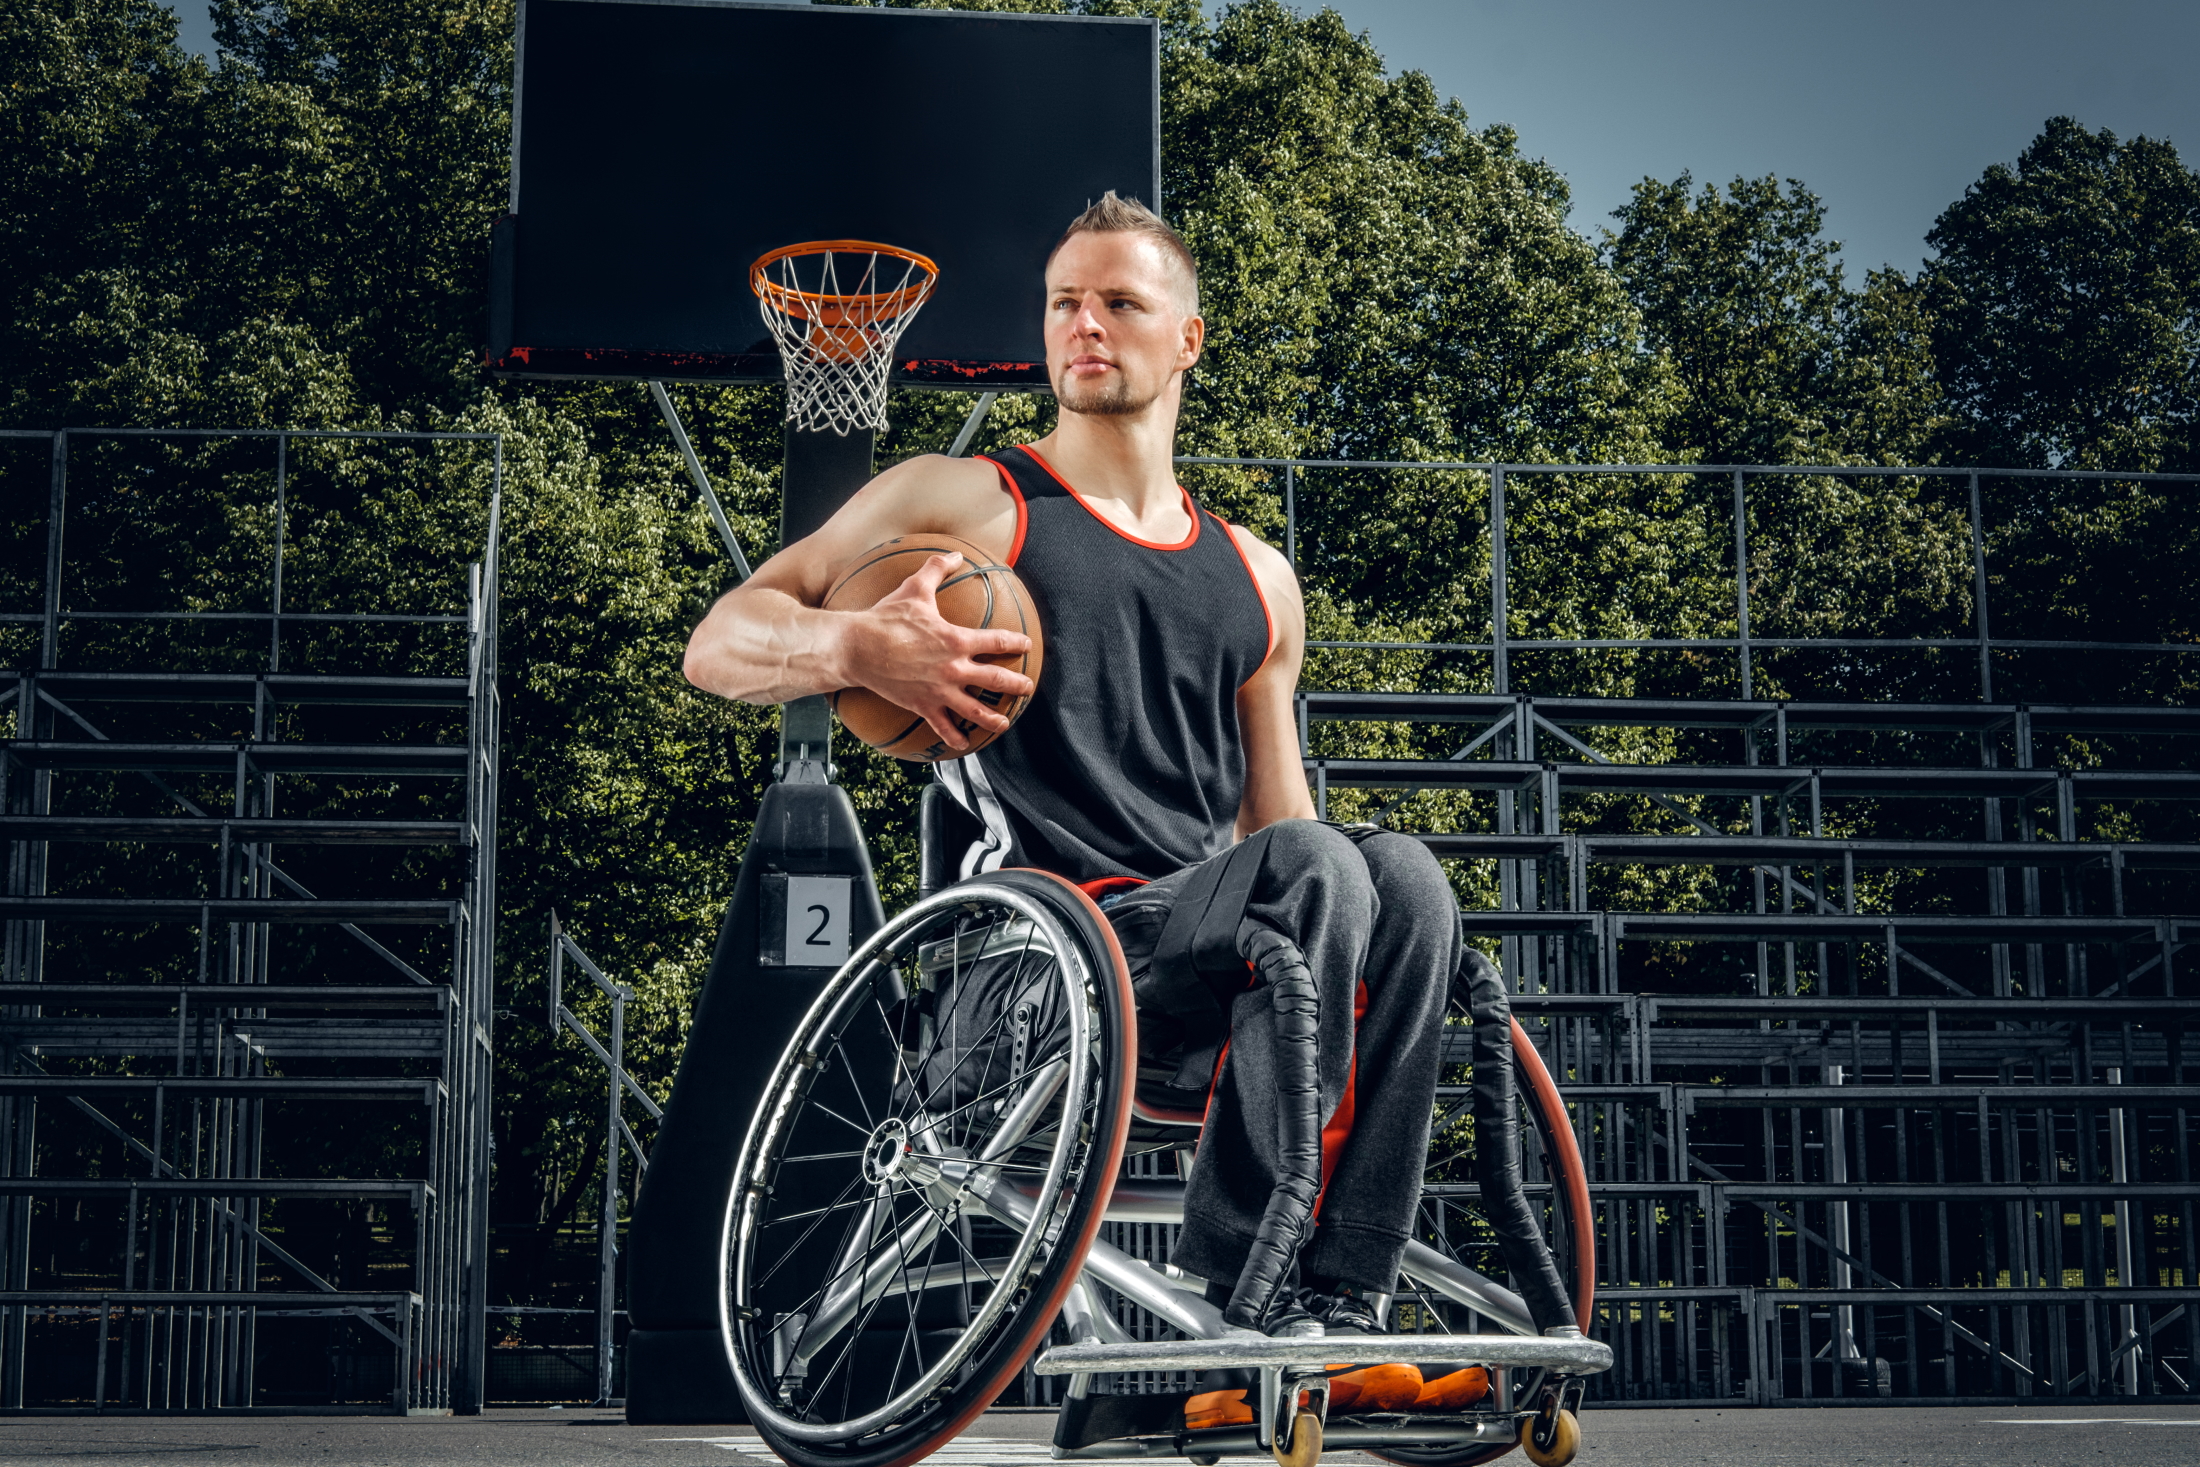 Portrait of cripple basketball player in wheelchair on open gaming ground.